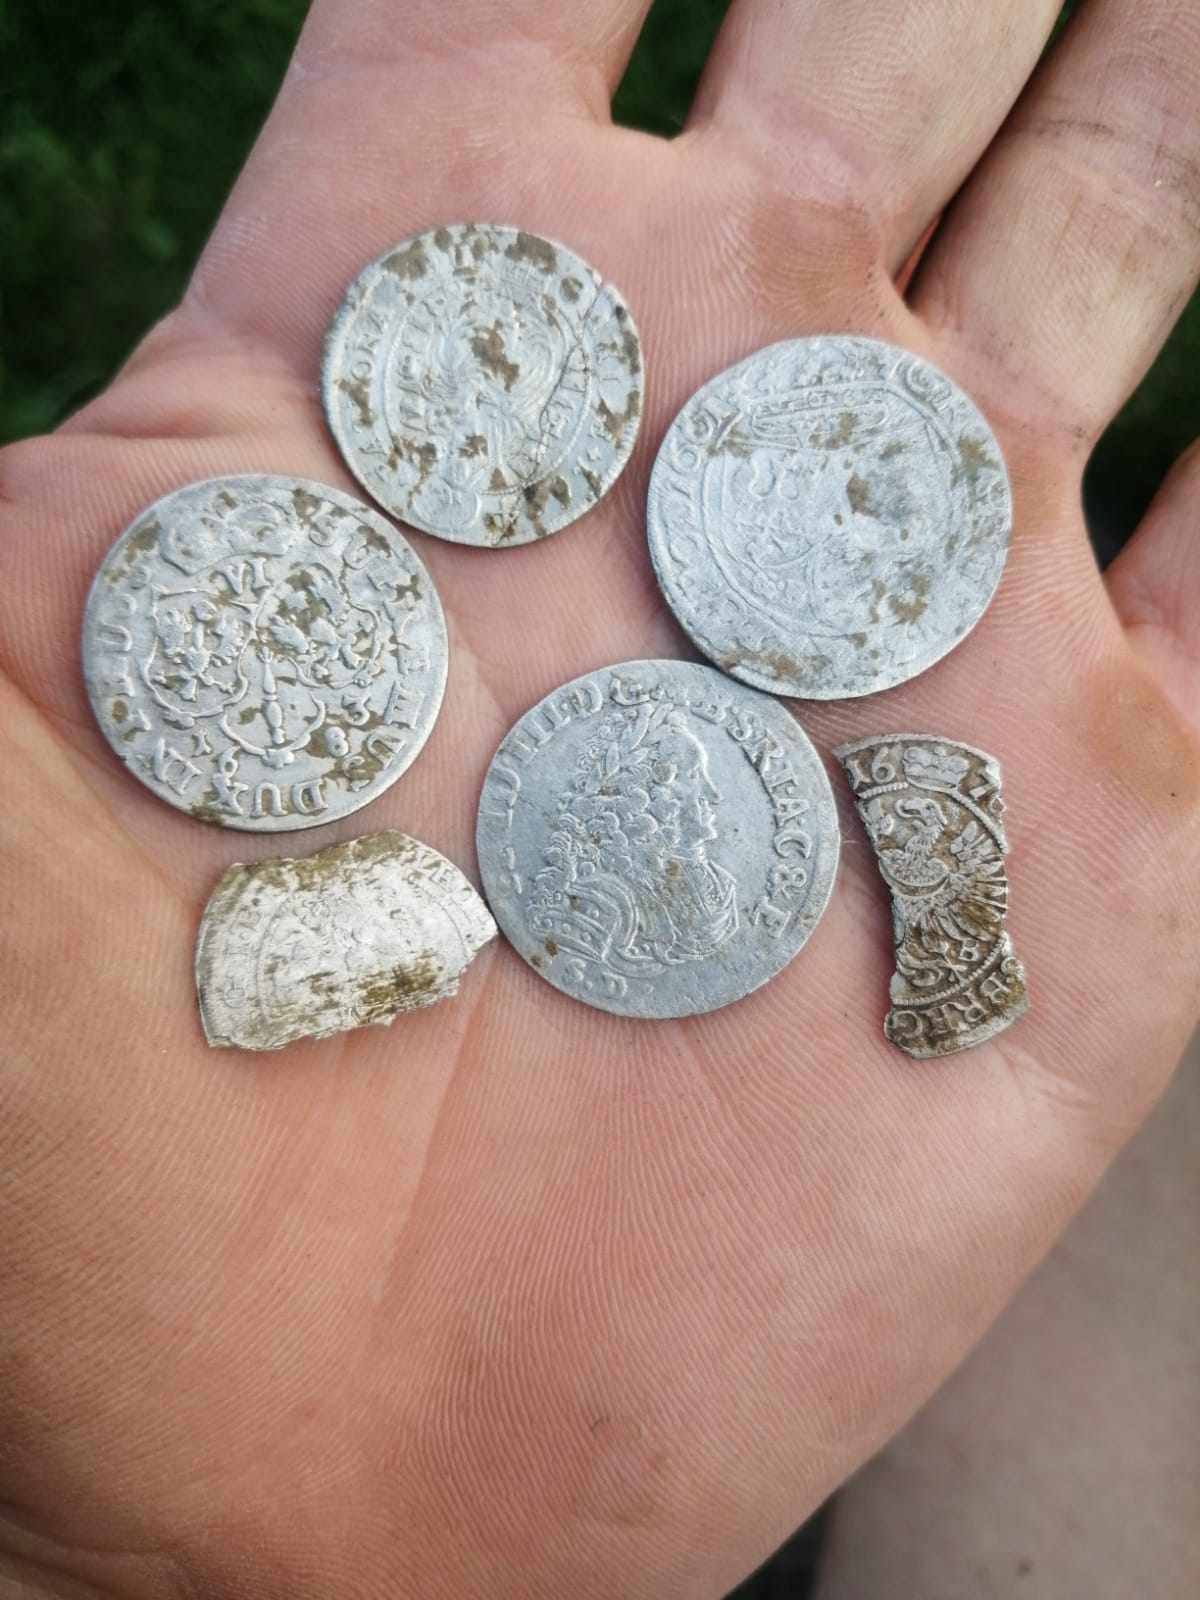 The legend of 300 years ago has been confirmed! A cache of coins of a famous swindler found in the mountains of Poland